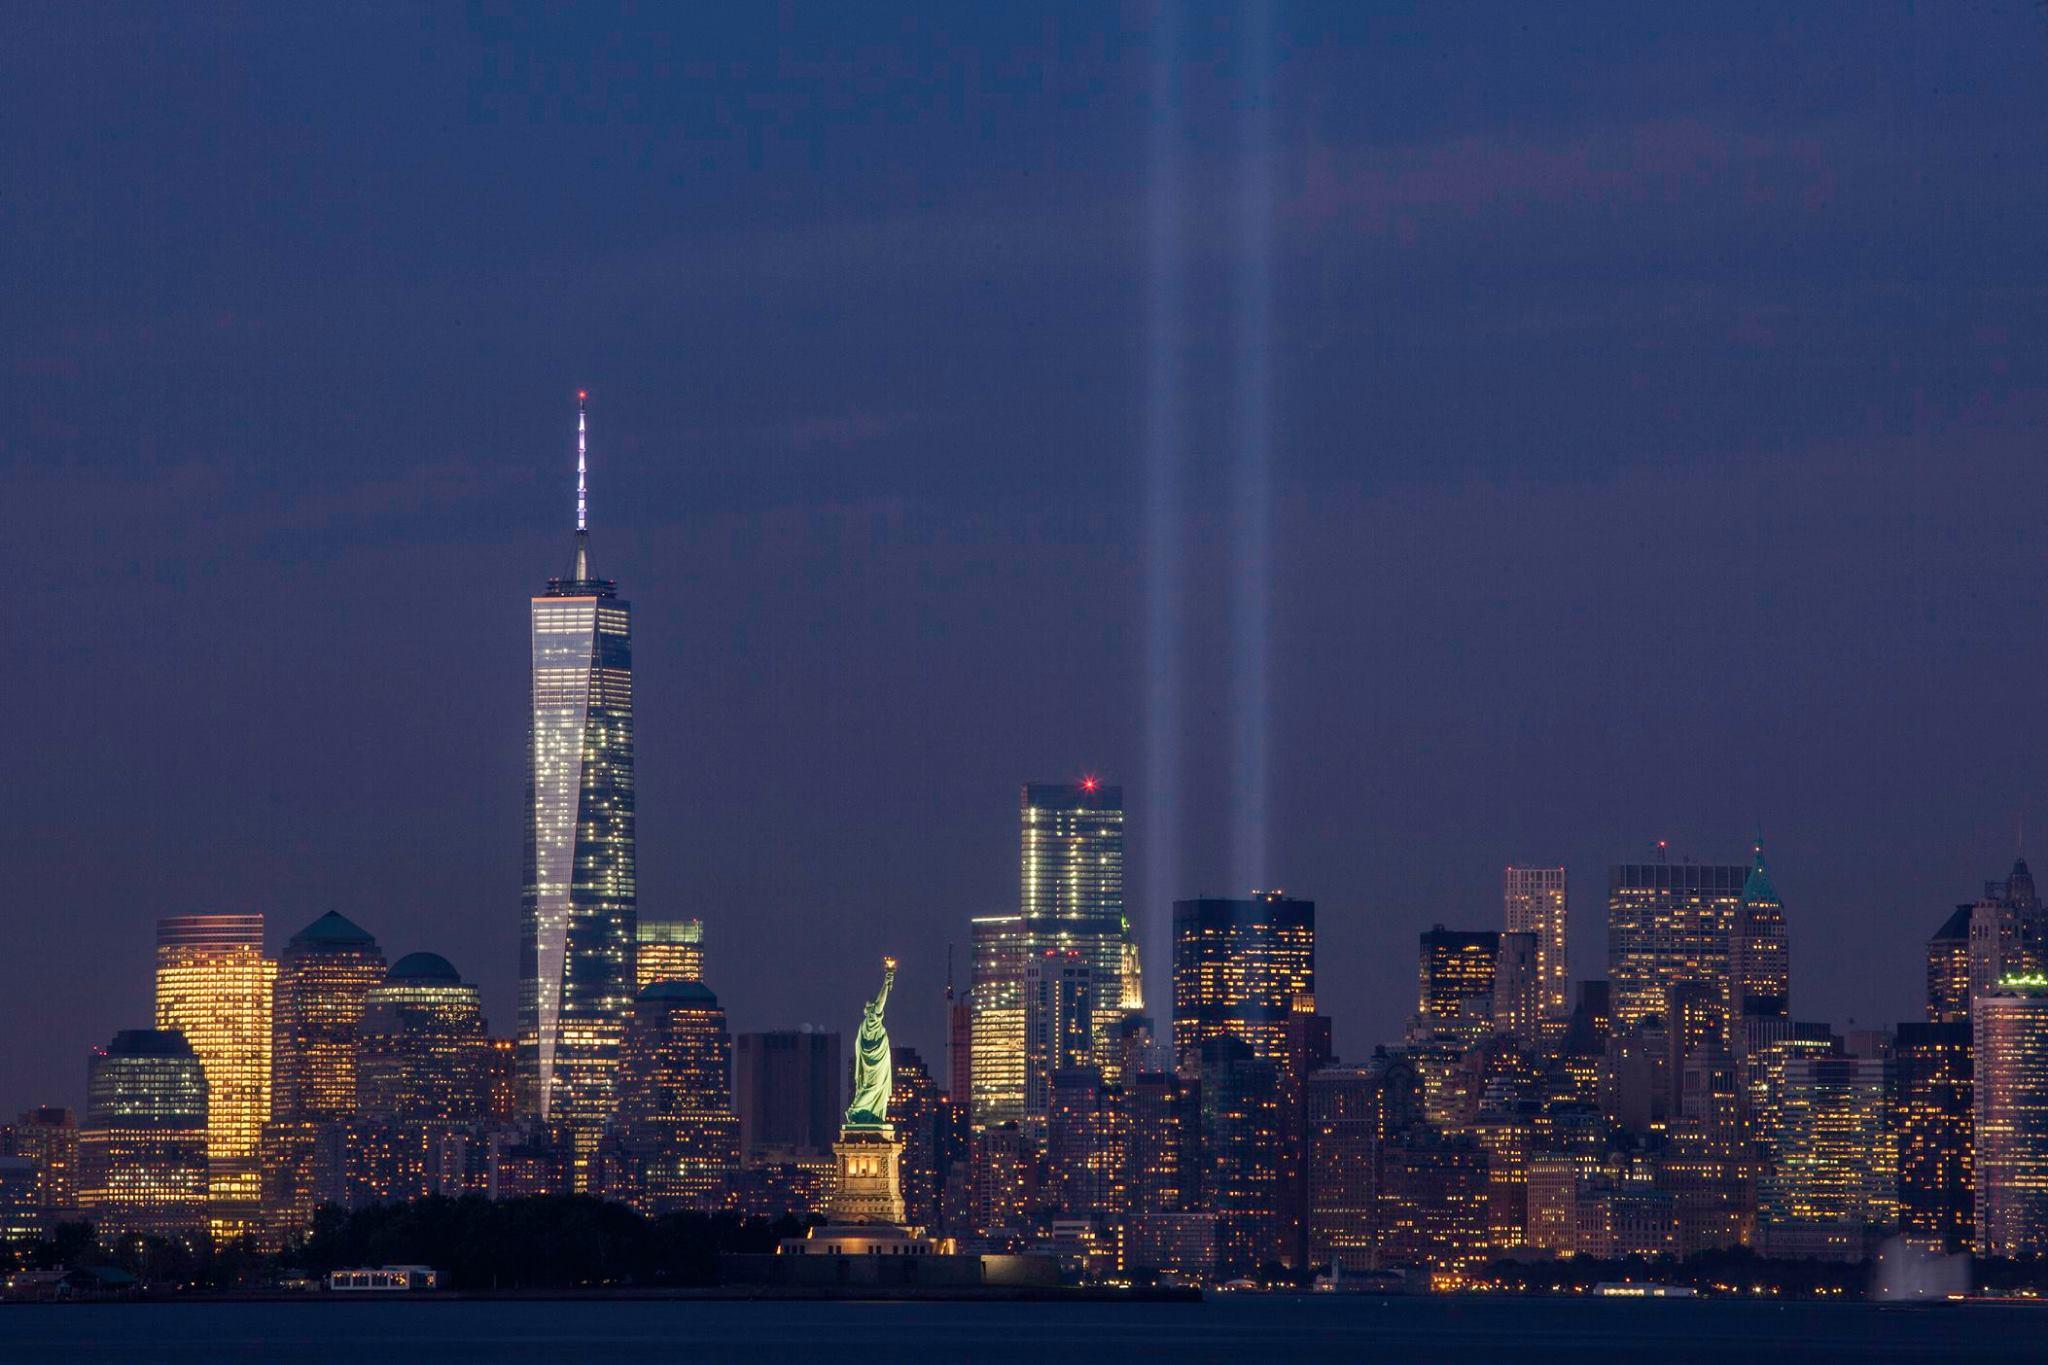 A photograph of the New York City skyline at night, including two beams of light commemorating the fallen towers of the World Trade Center.